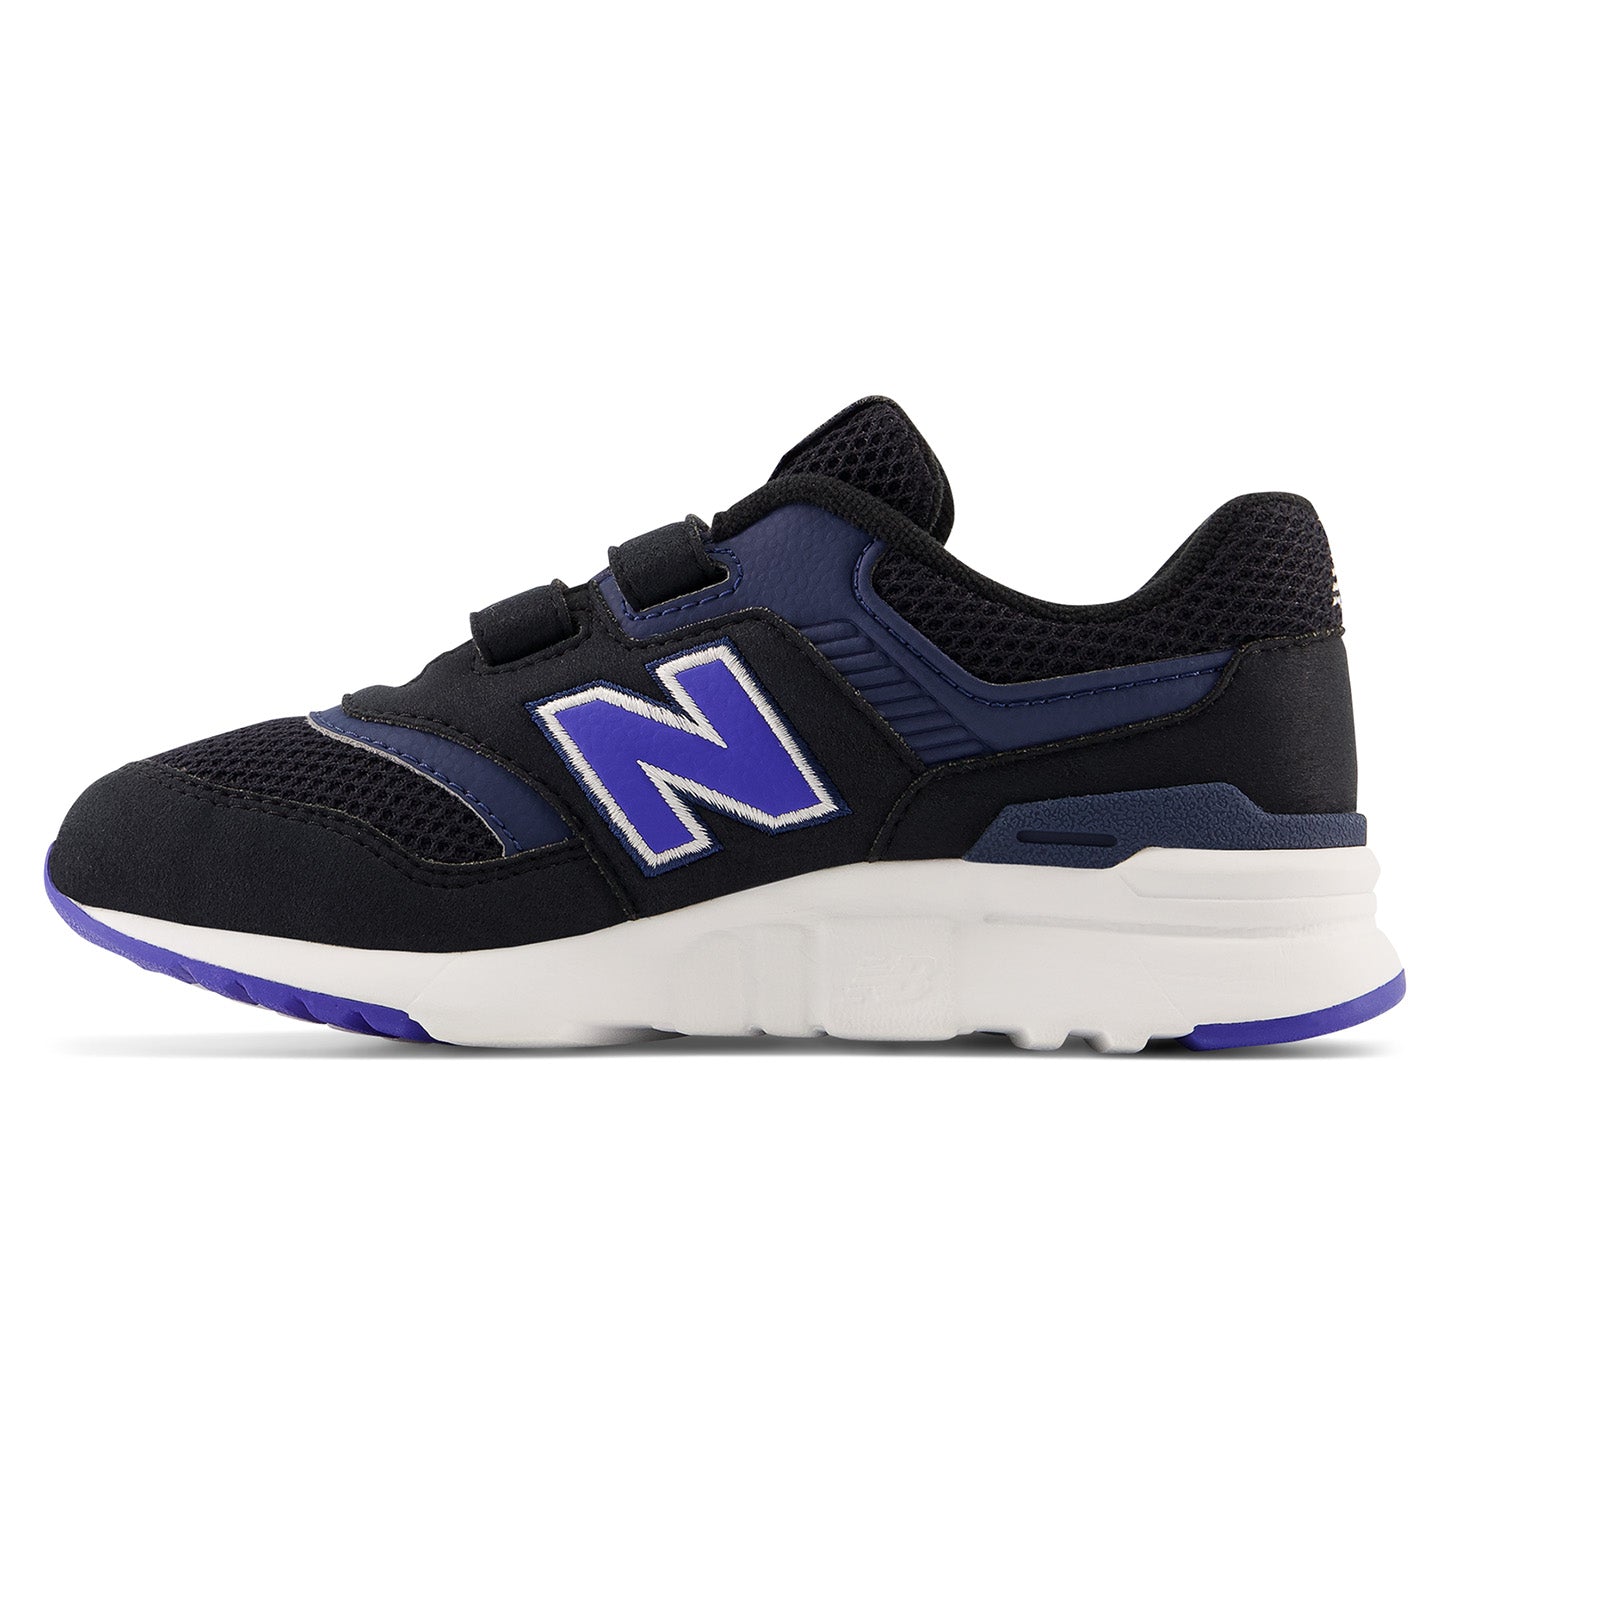 NB Lifestyle Shoes Pre Boys Running